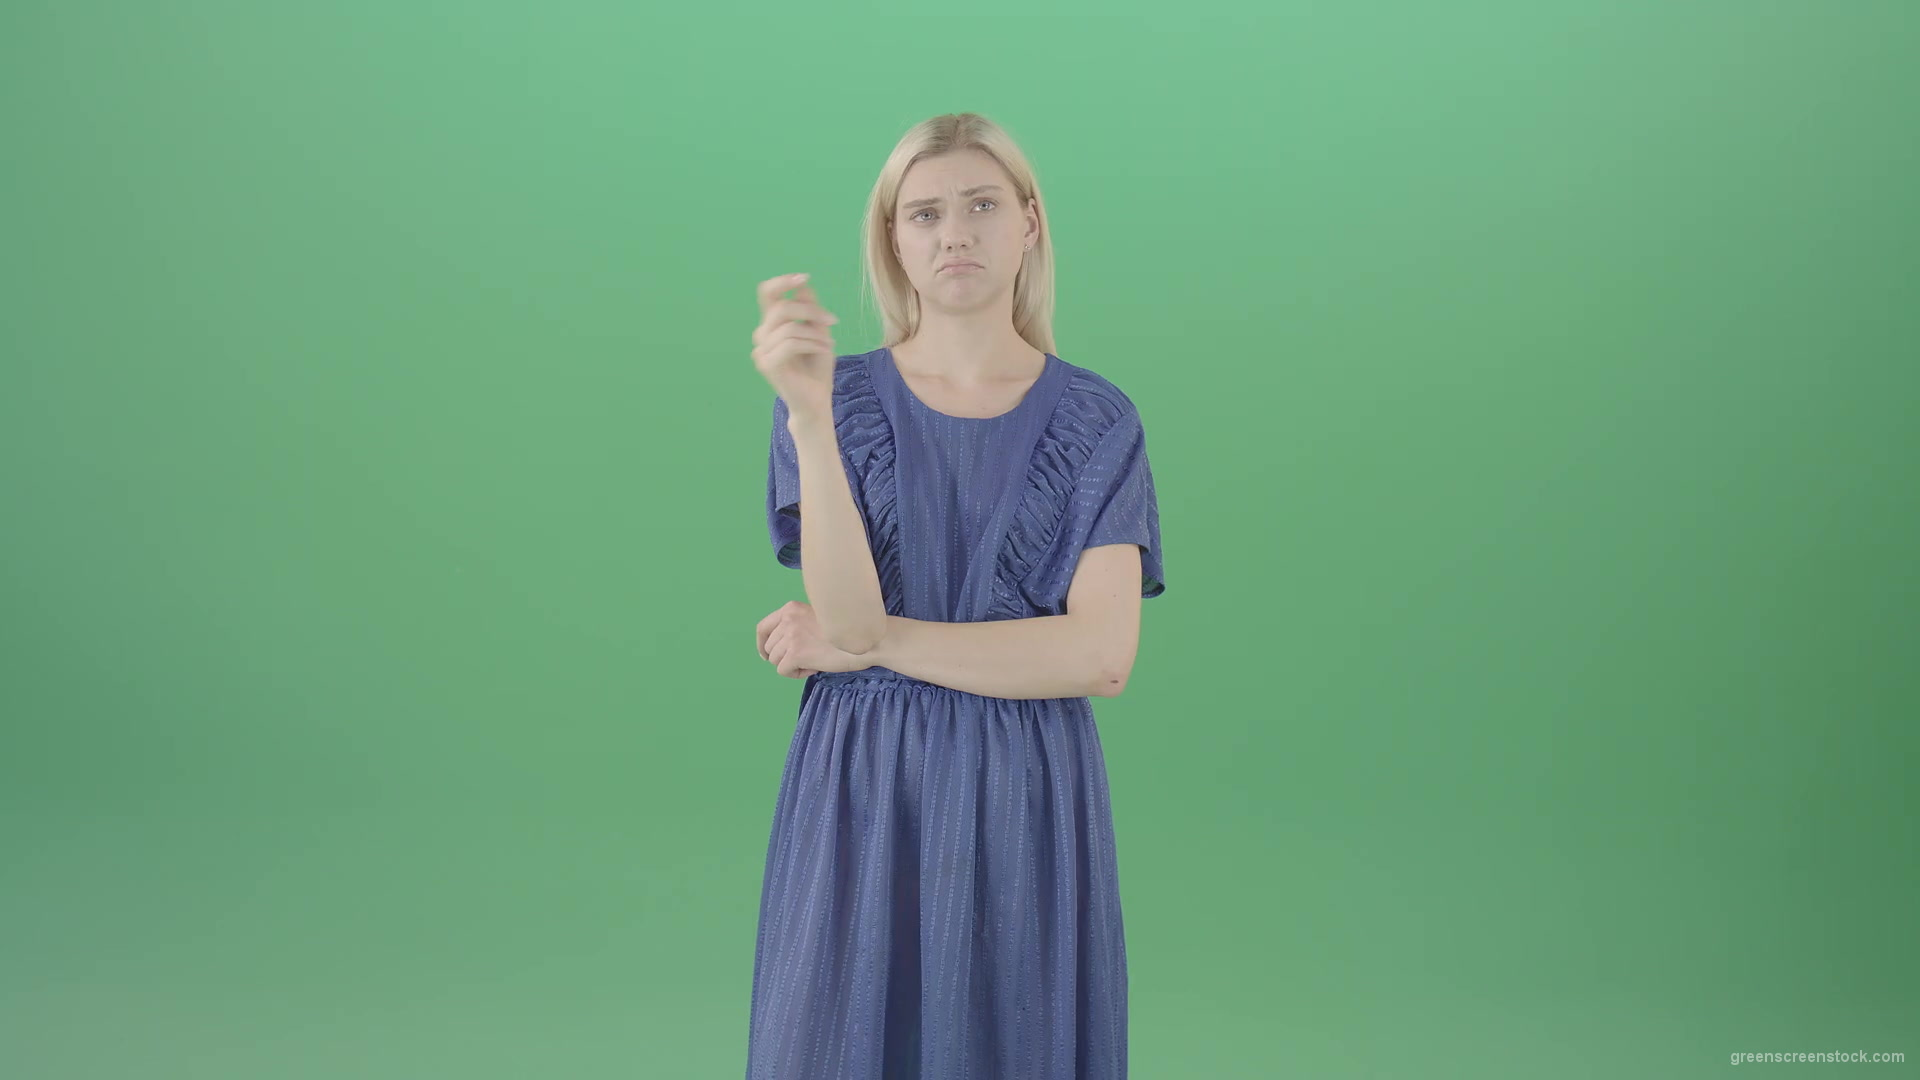 Boring-blonde-girl-in-blue-costume-can-not-find-virtual-products-on-touch-screen-isolated-on-green-background-4K-Video-Footage--1920_008 Green Screen Stock